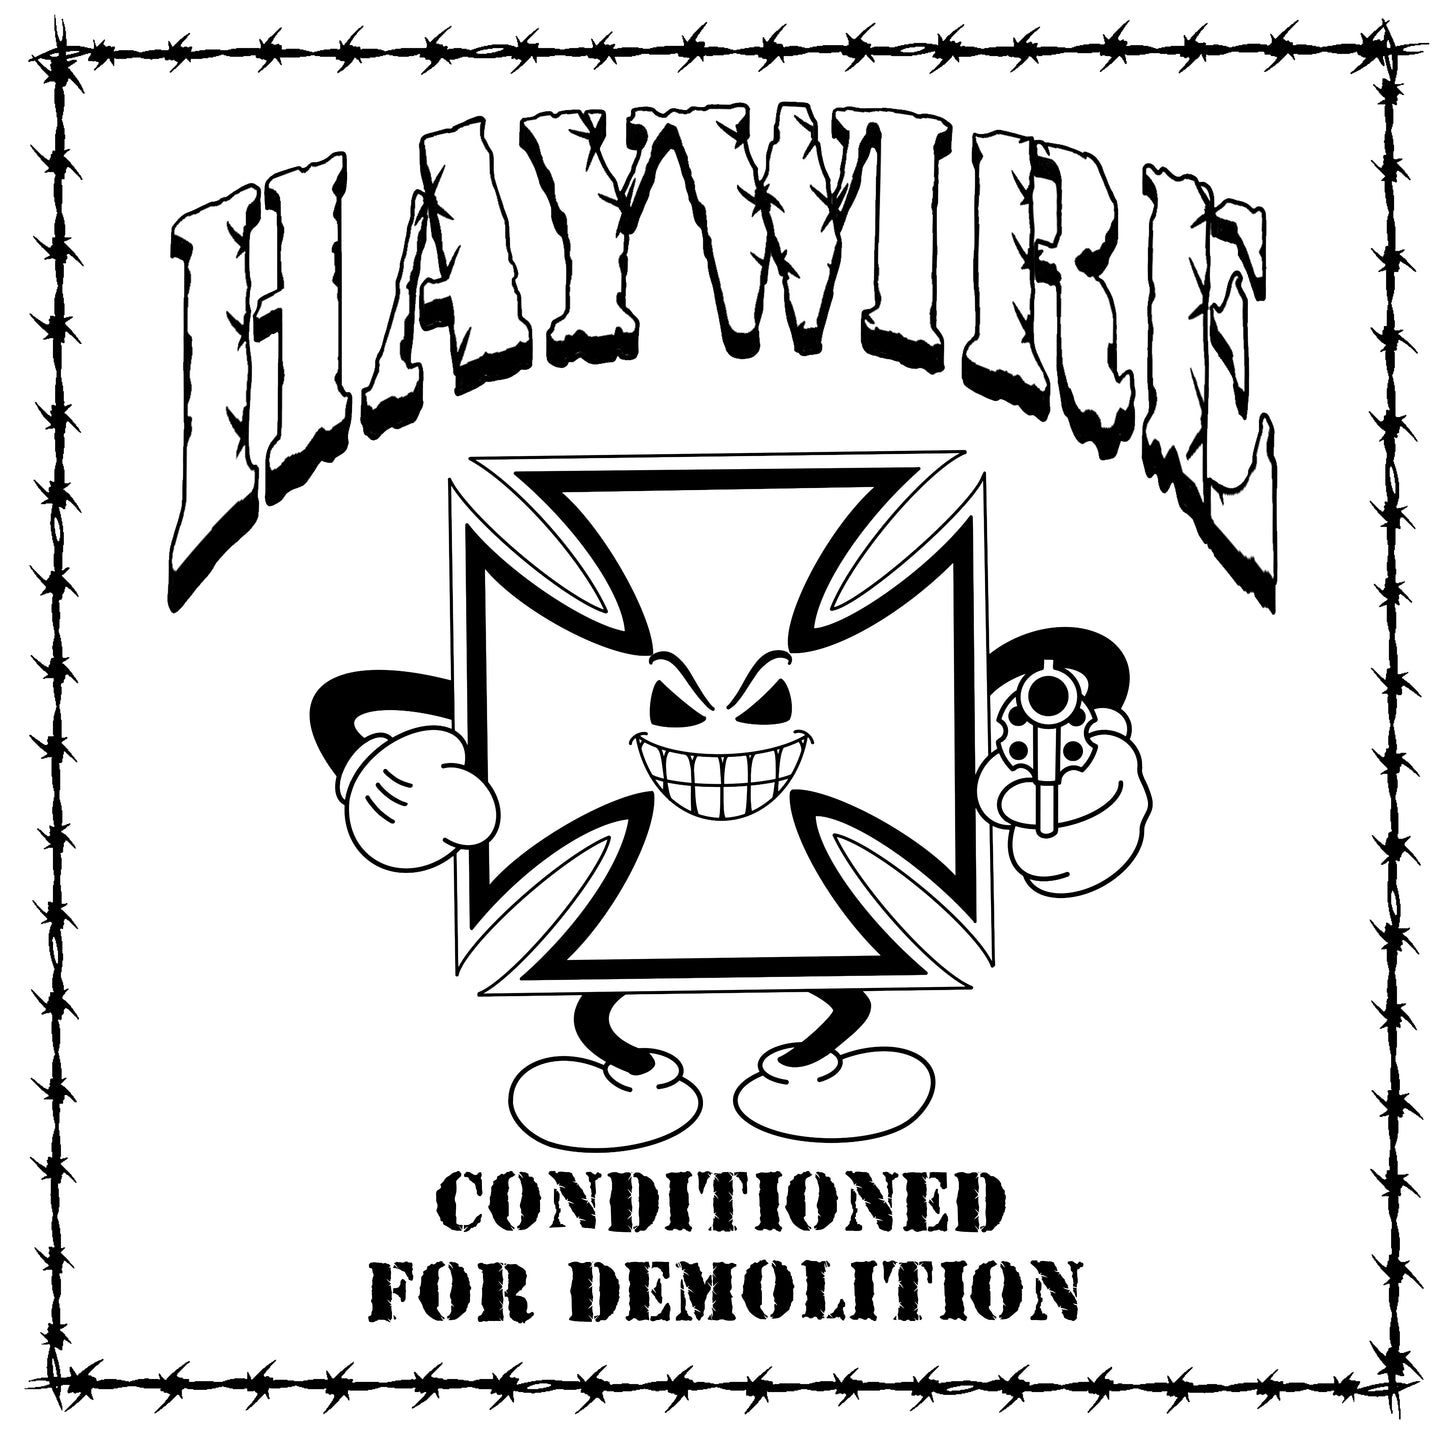 Haywire - Conditioned For Demolition LP/CD